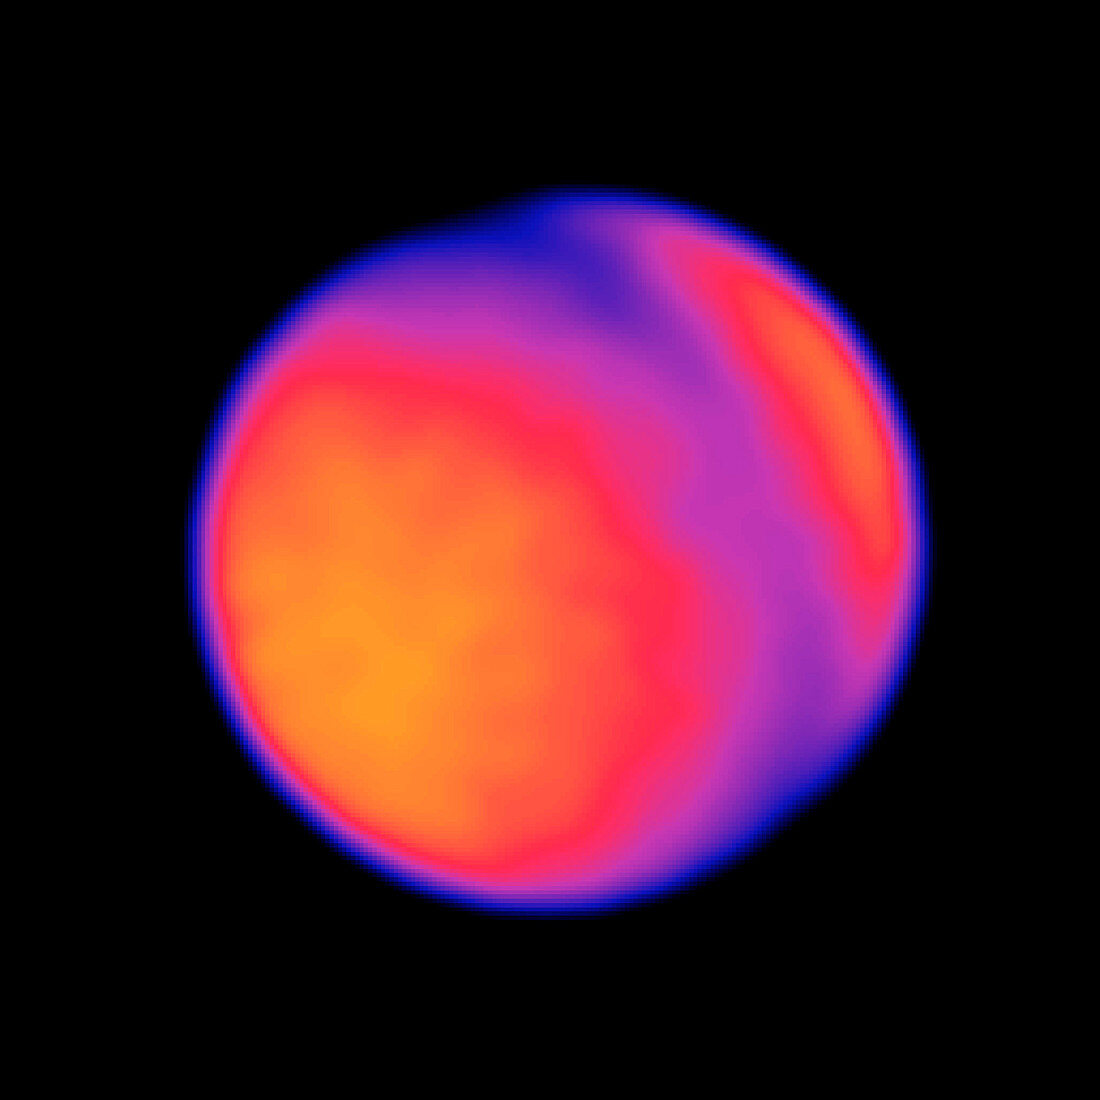 Temperature map of Mercury from radio observations